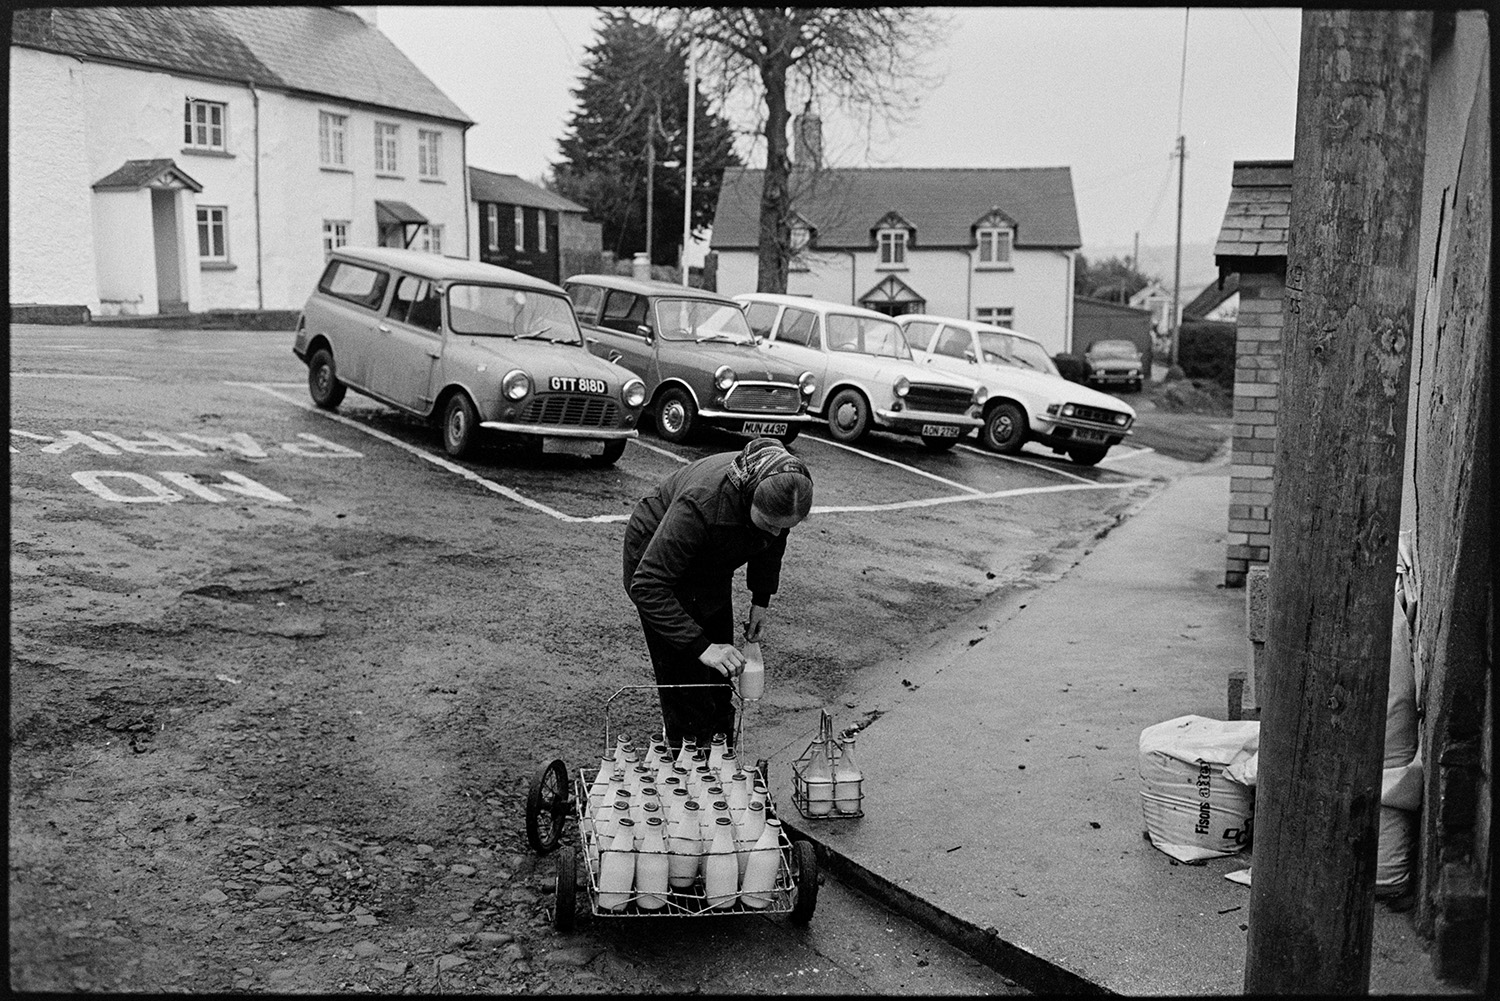 Woman delivering milk round village. <br />
[Jane Woolacott delivering milk bottles in Atherington. He is transferring bottles from a trolley into a small holder outside a house. Parked cars and houses are visible in the background.]